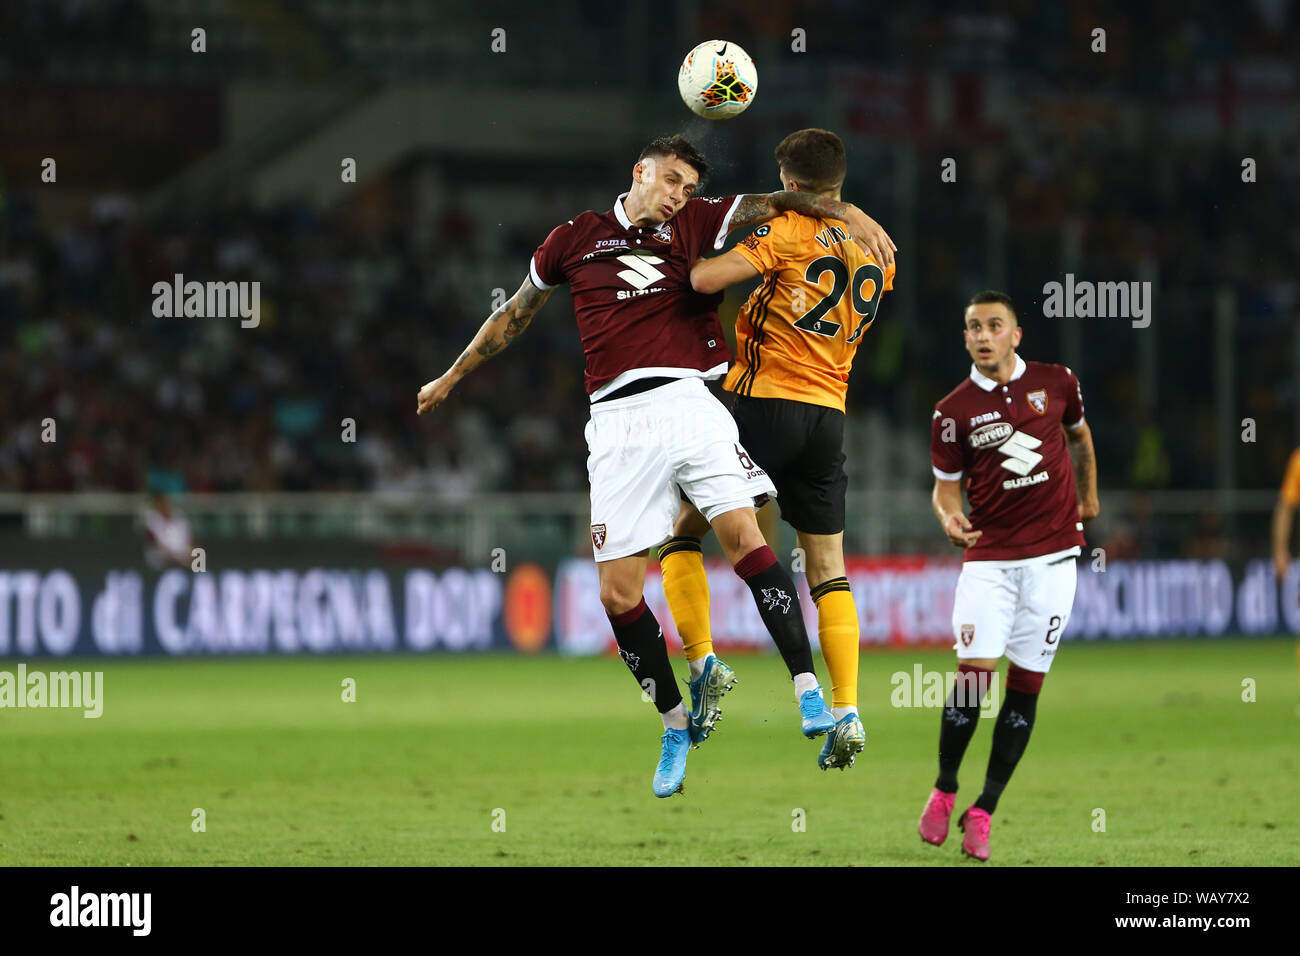 Torino, Italy. 22nd Aug, 2019. Ruben Vinagre of Wolverhampton Wanderers Fc in action during the UEFA Europa League playoff first leg football match between Torino Fc and Wolverhampton Wanderers Fc. Credit: Marco Canoniero/Alamy Live News Stock Photo